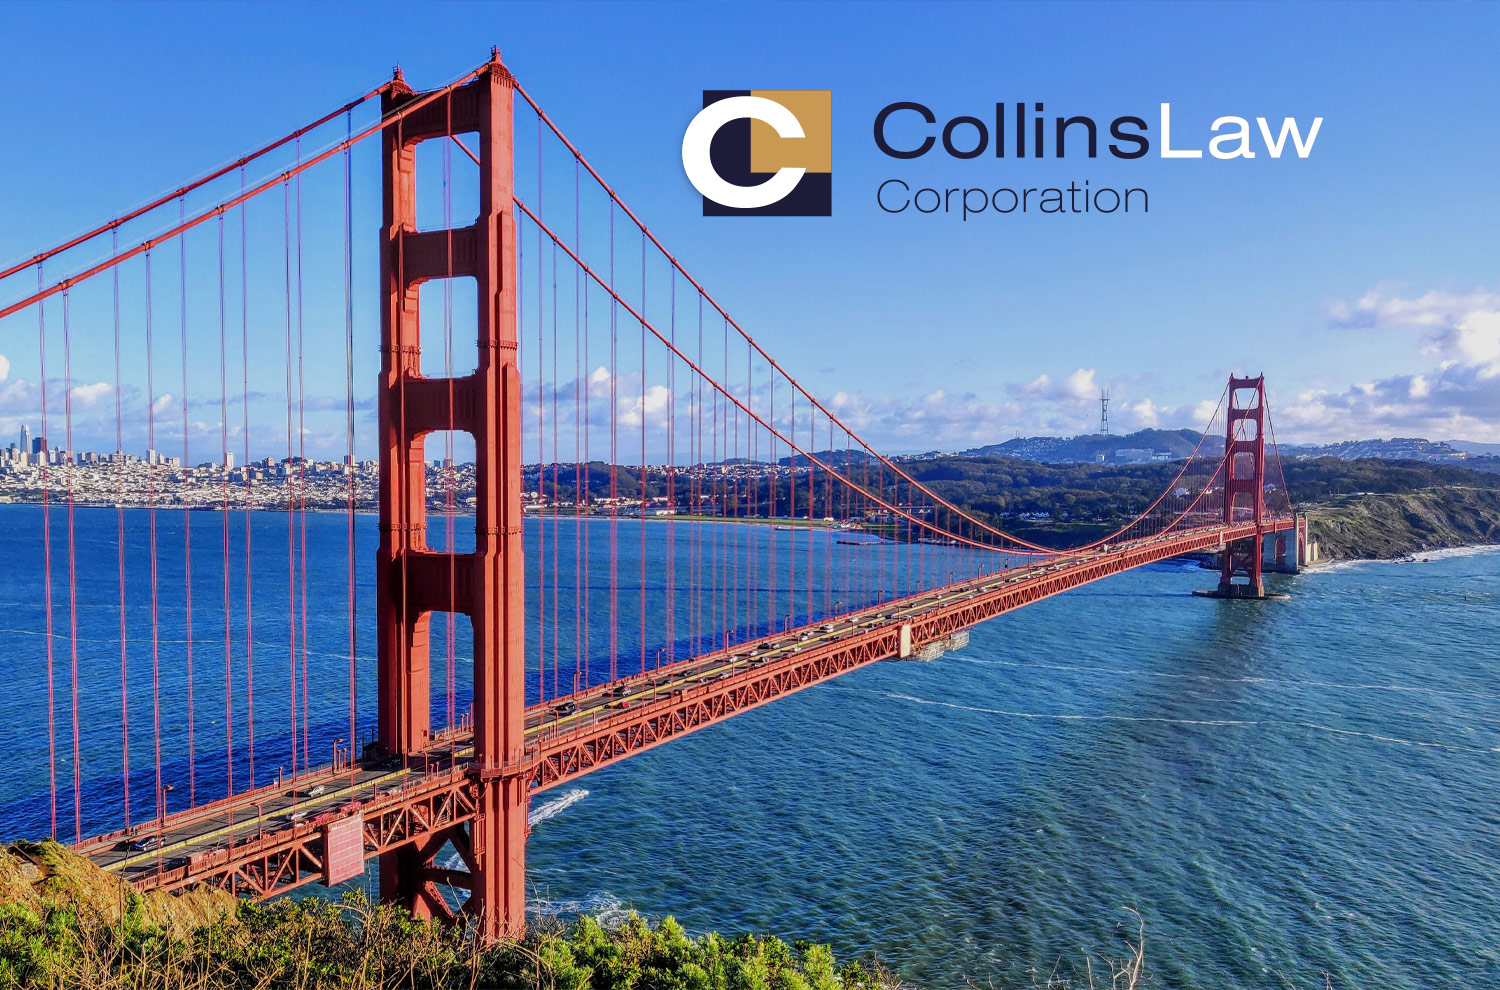 Image collage featuring the Collins Law logo and the Golden Gate Bridge